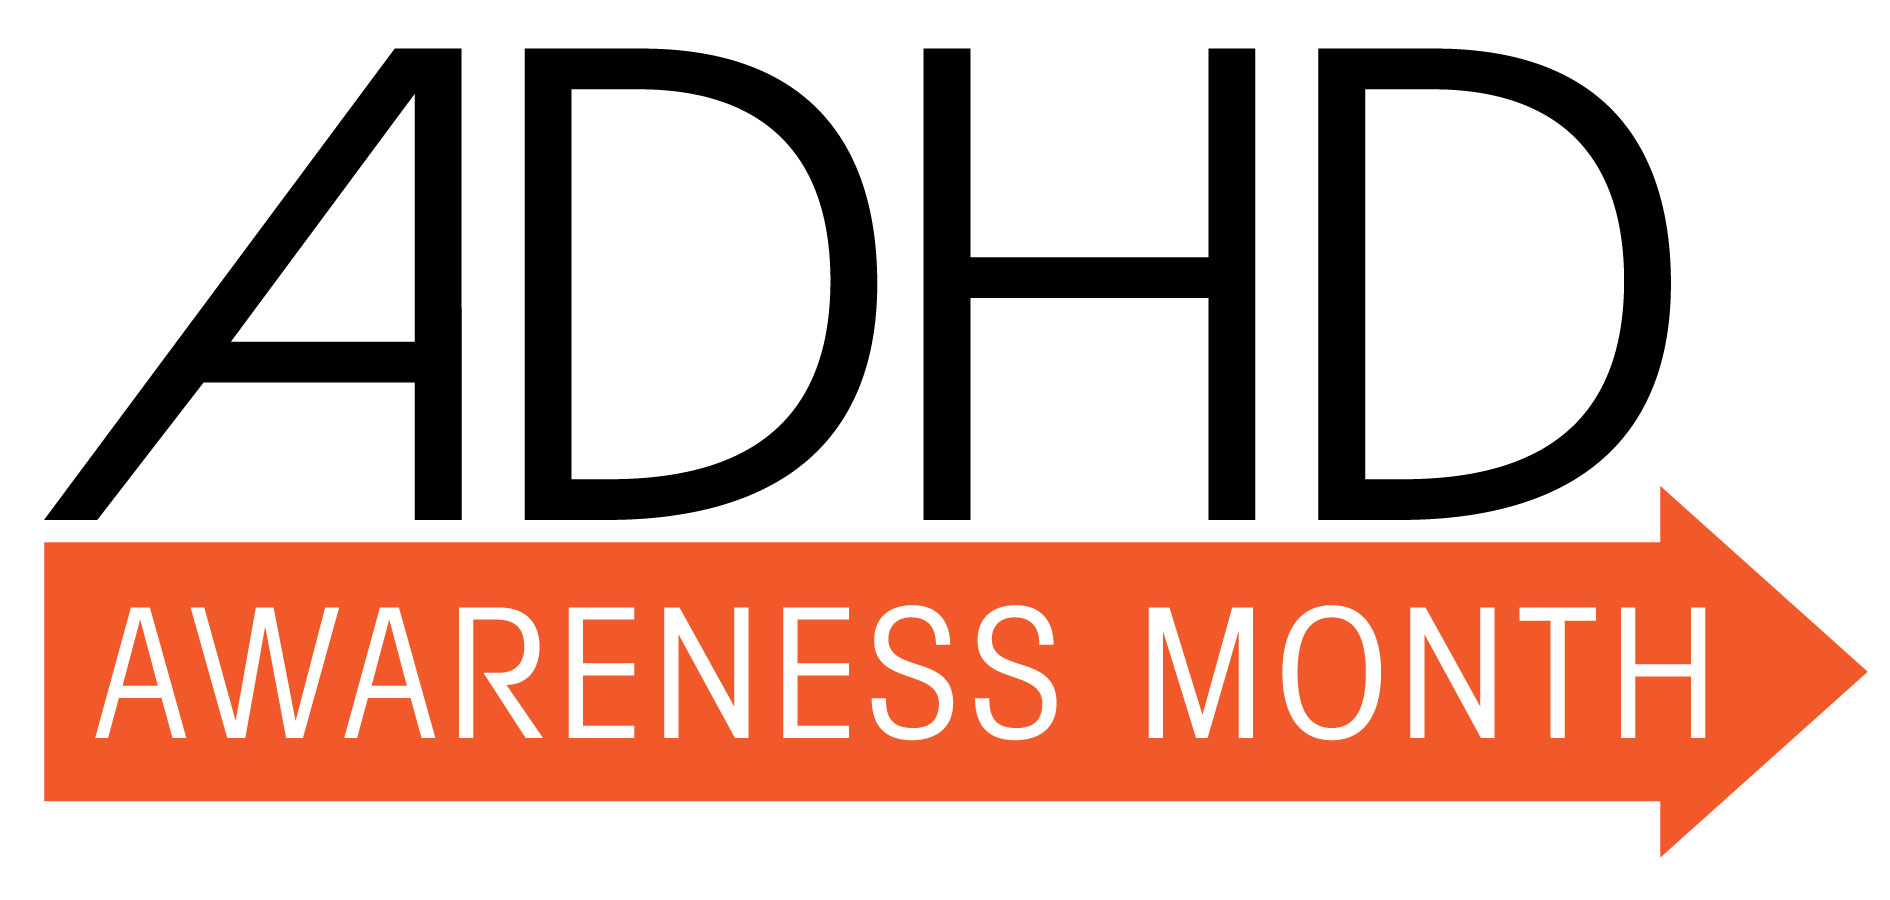 October is ADHD Awareness Month